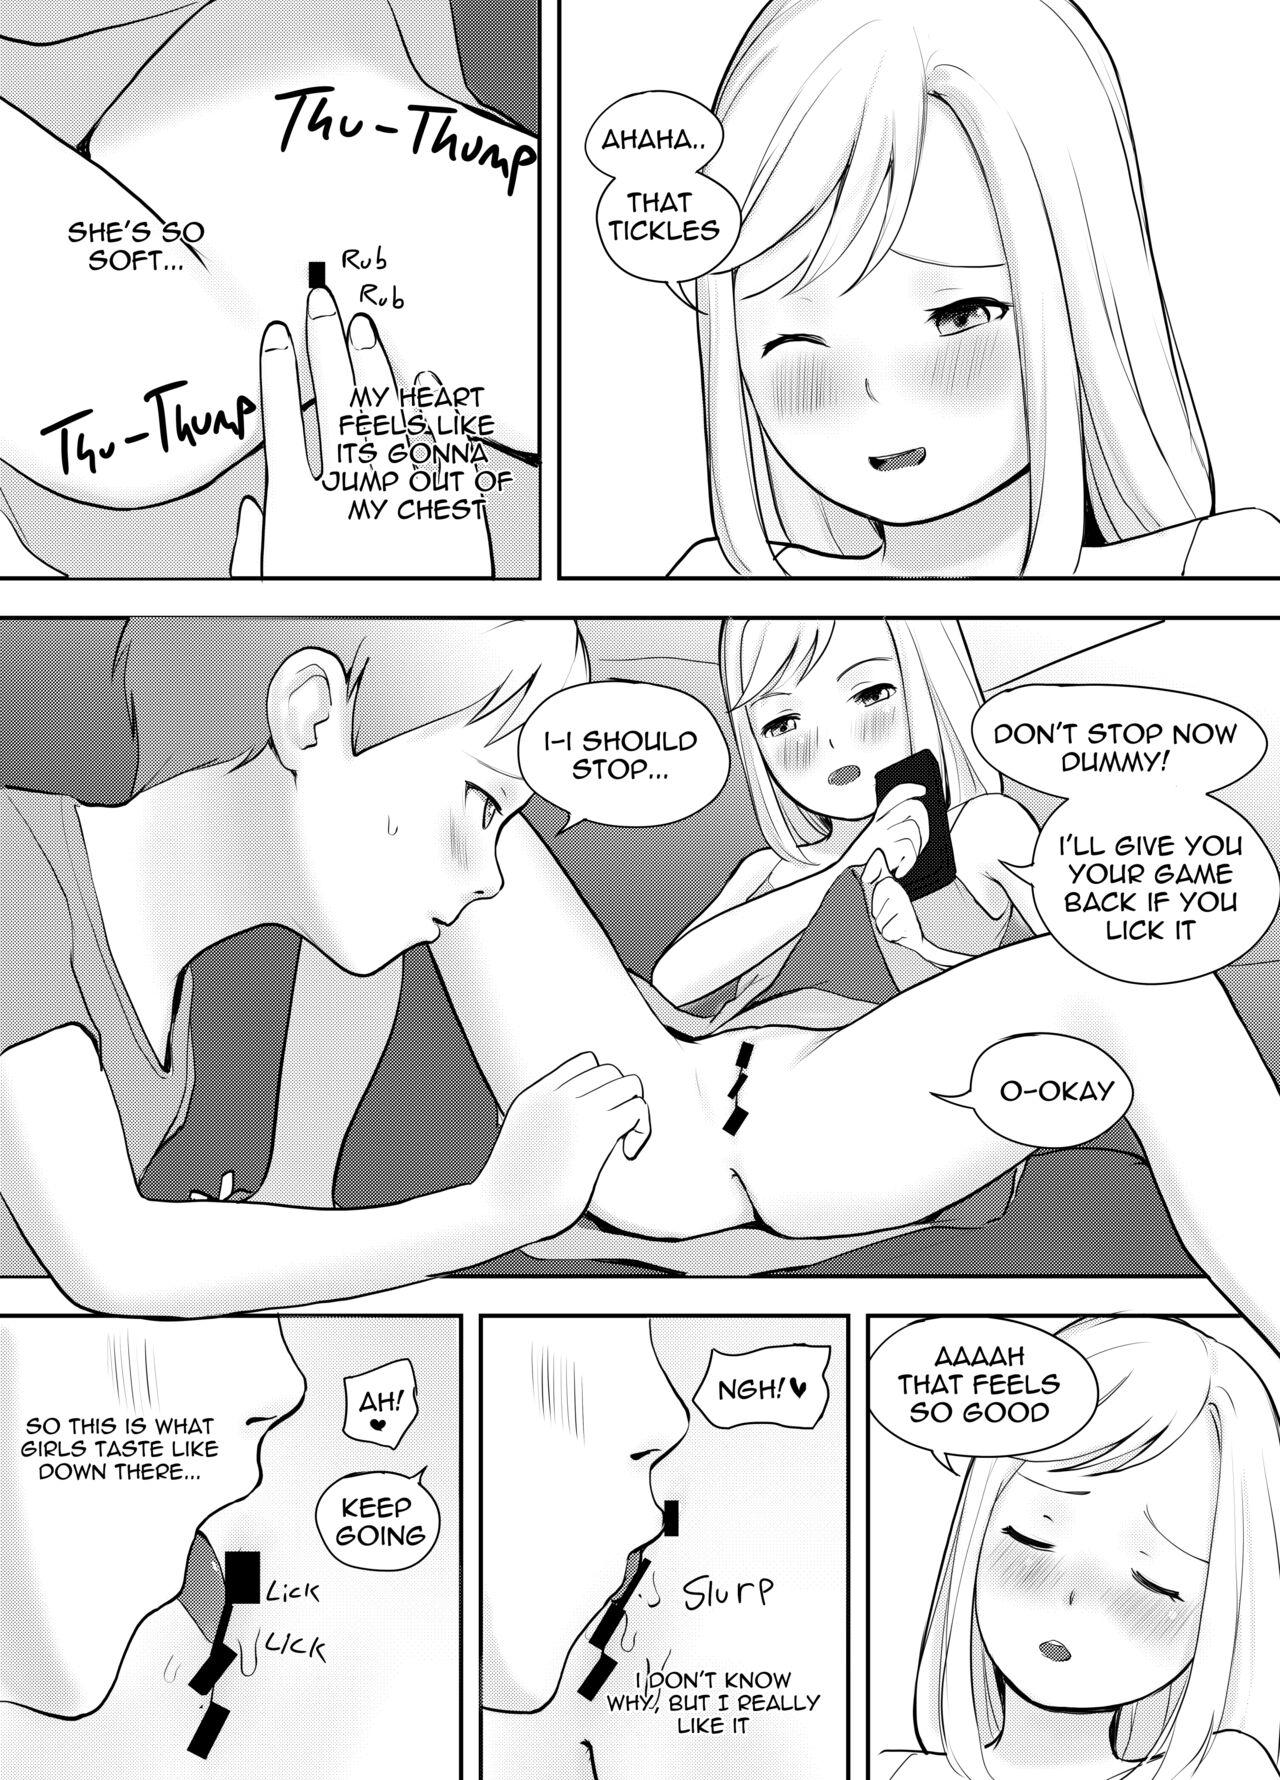 Desperate Passing the Time - Original Couples Fucking - Page 6